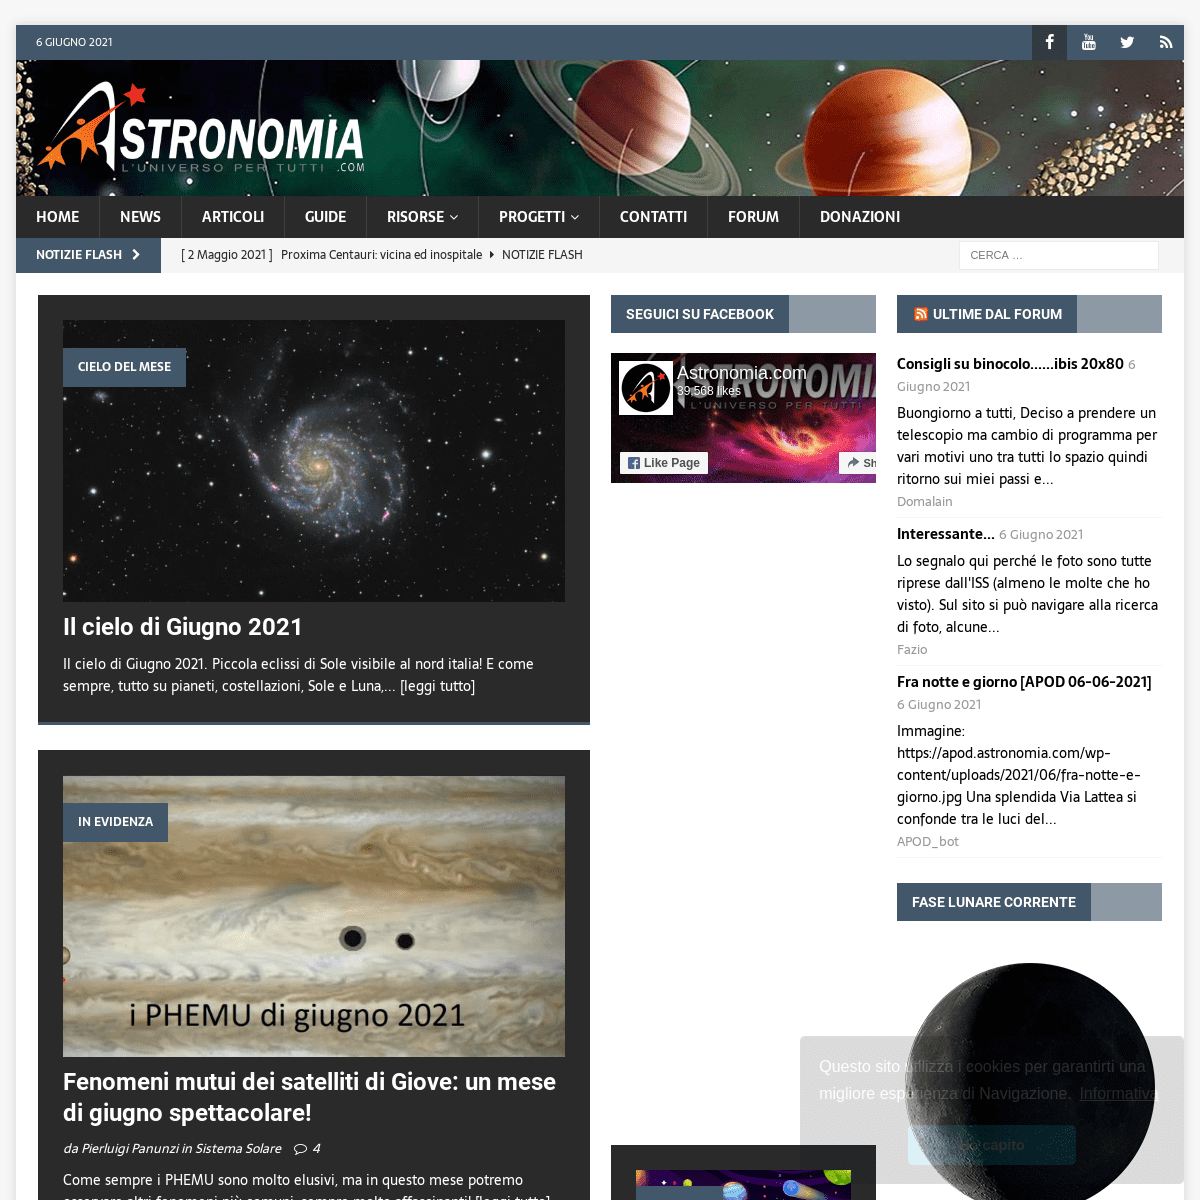 A complete backup of https://astronomia.com